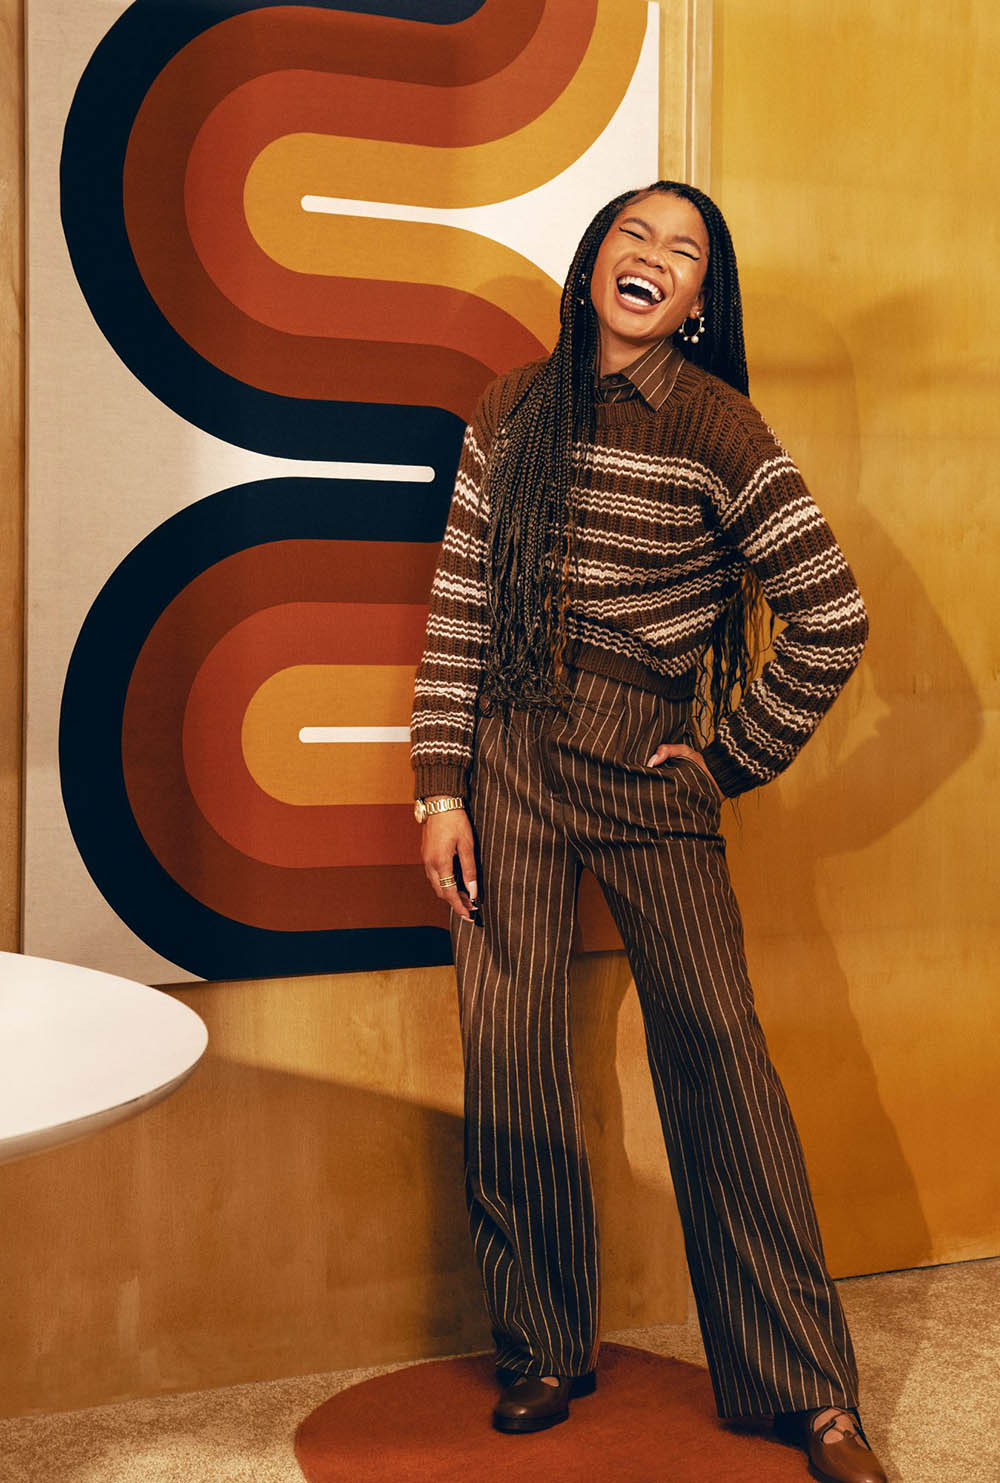 Storm Reid covers InStyle US November 2020 Digital Edition by AB+DM